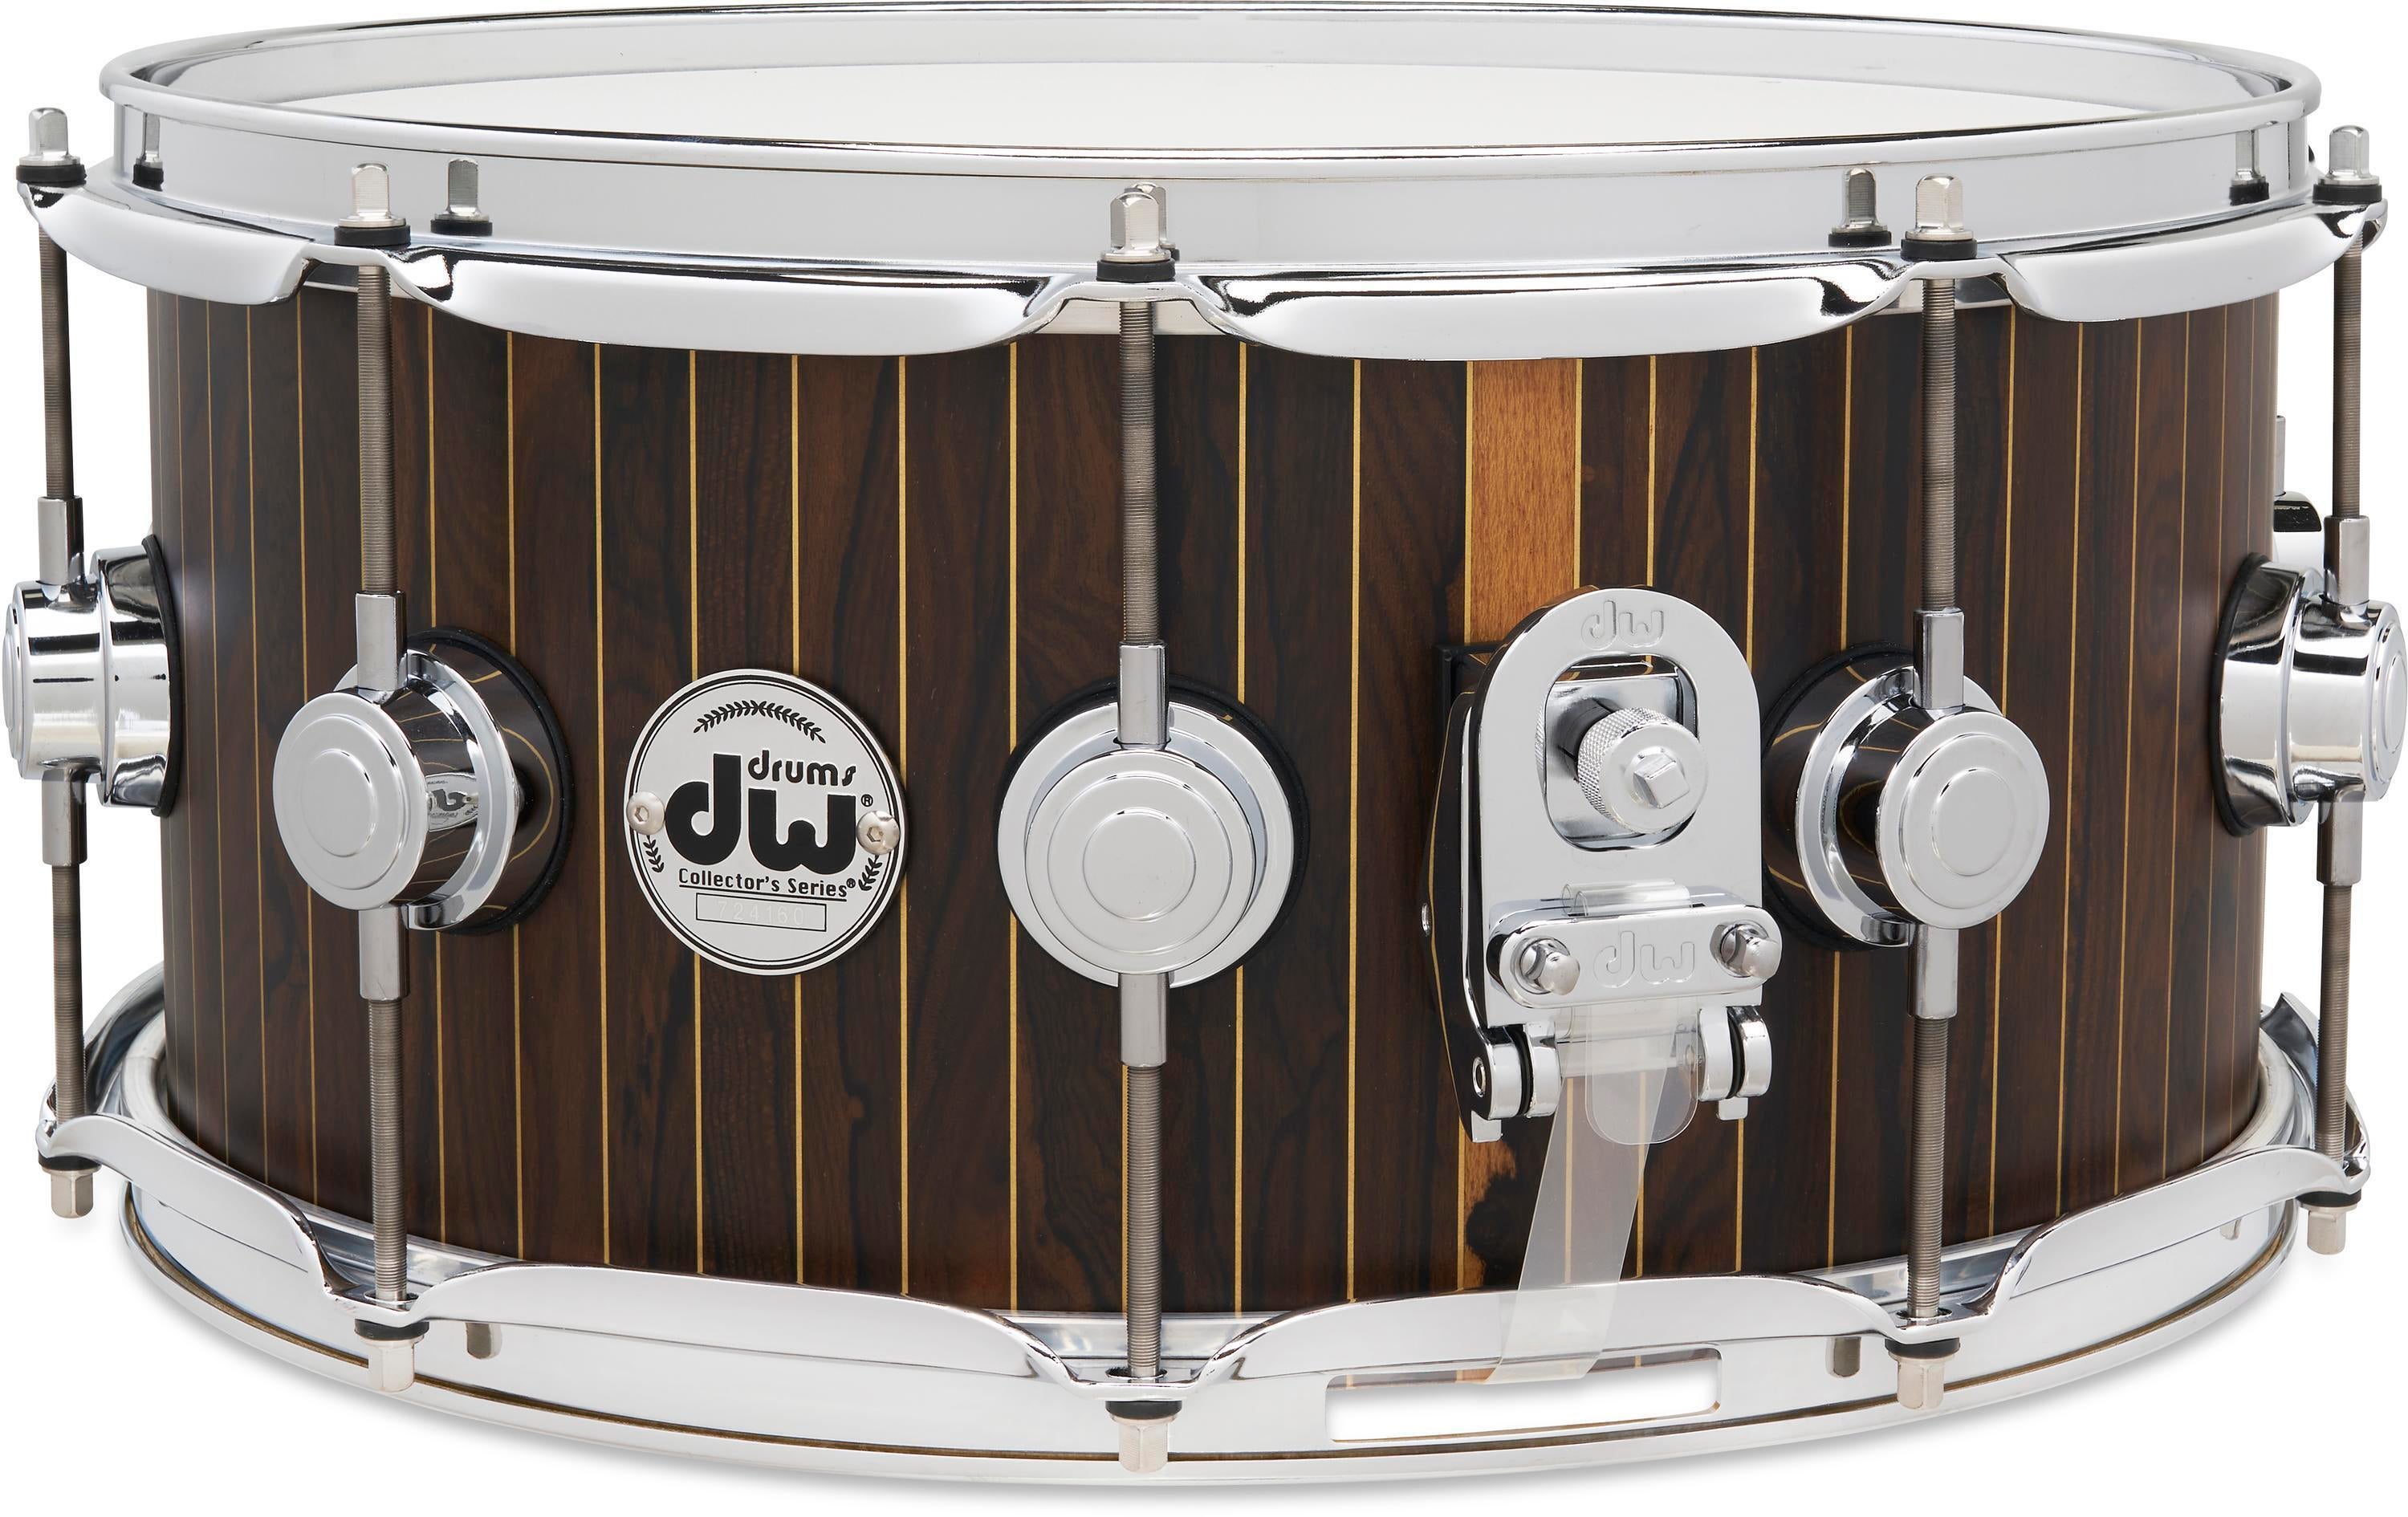 DW Limited-edition Collector's Series Maple Snare Drum - 6.5 inch x 14  inch, Brass Pinstripe Ziricote